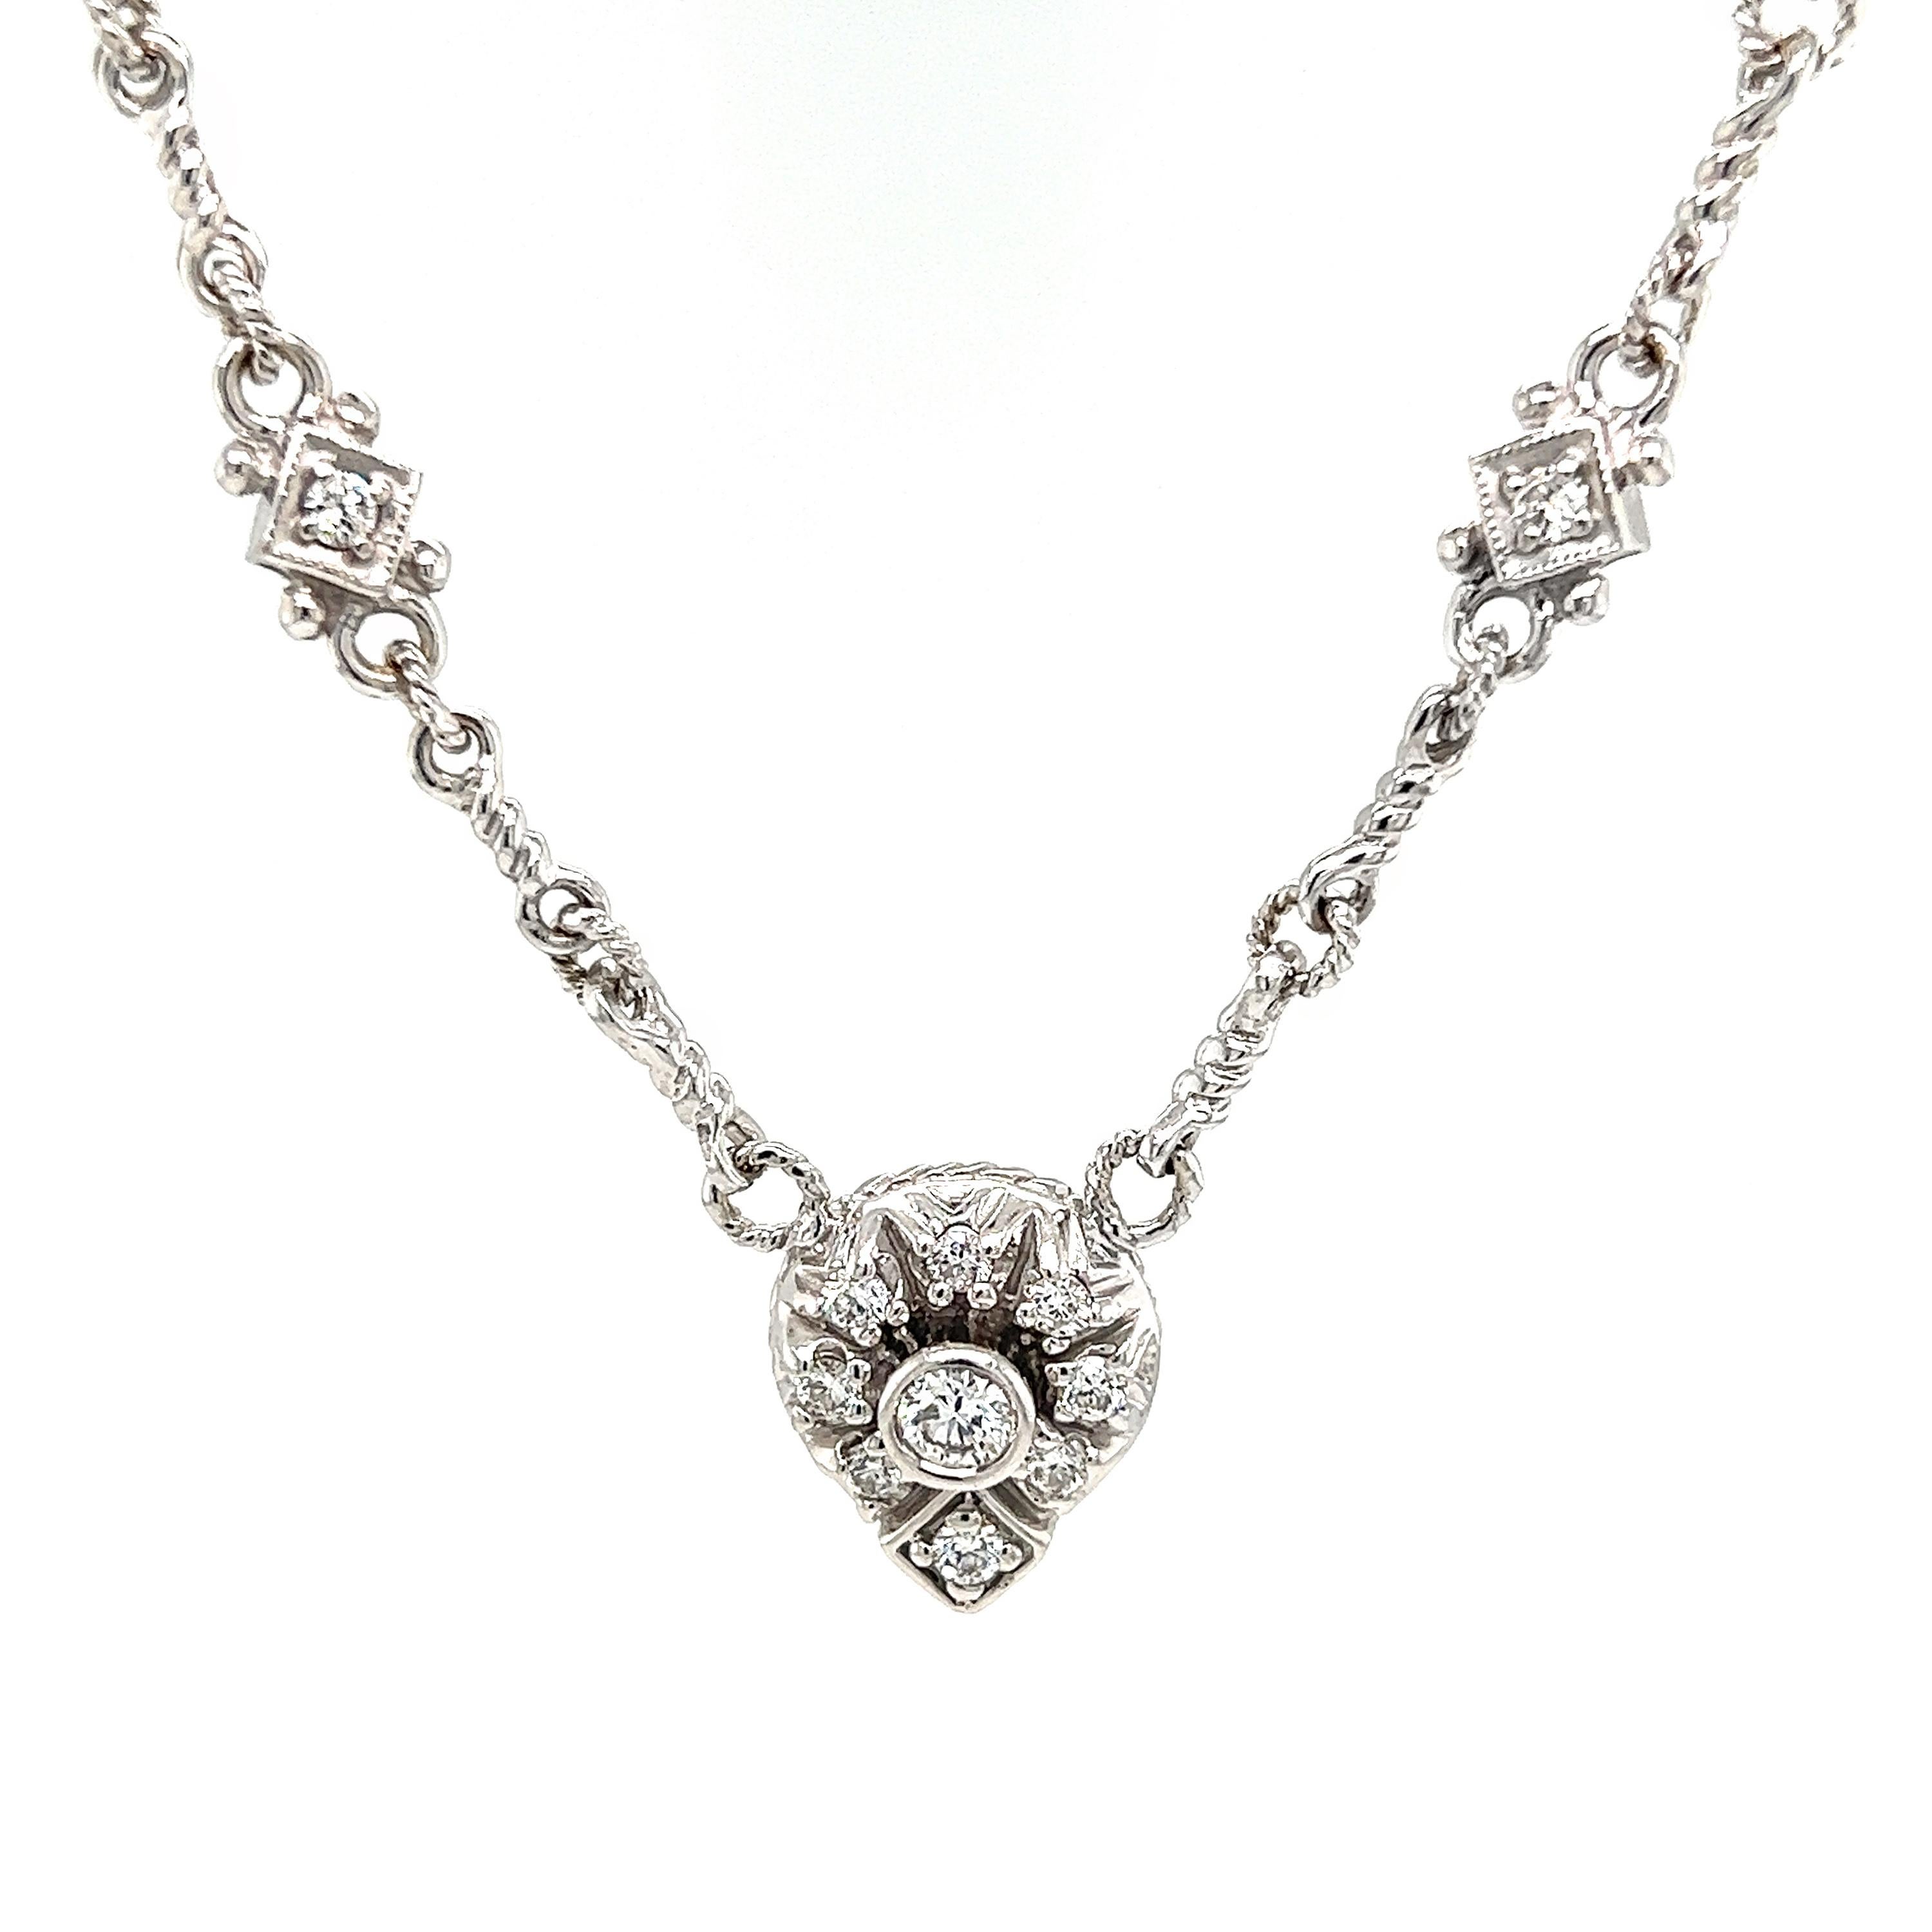 Judith Ripka 18K White Gold and Diamond Handmade Chain Pendant Necklace

Apprx. 0.70 carat G-H color, VS-SI clarity diamonds total weight

Necklace is 16 inches in length total and uses a handmade chain.

Pendant measures 0.54 inch x 0.47.

Signed